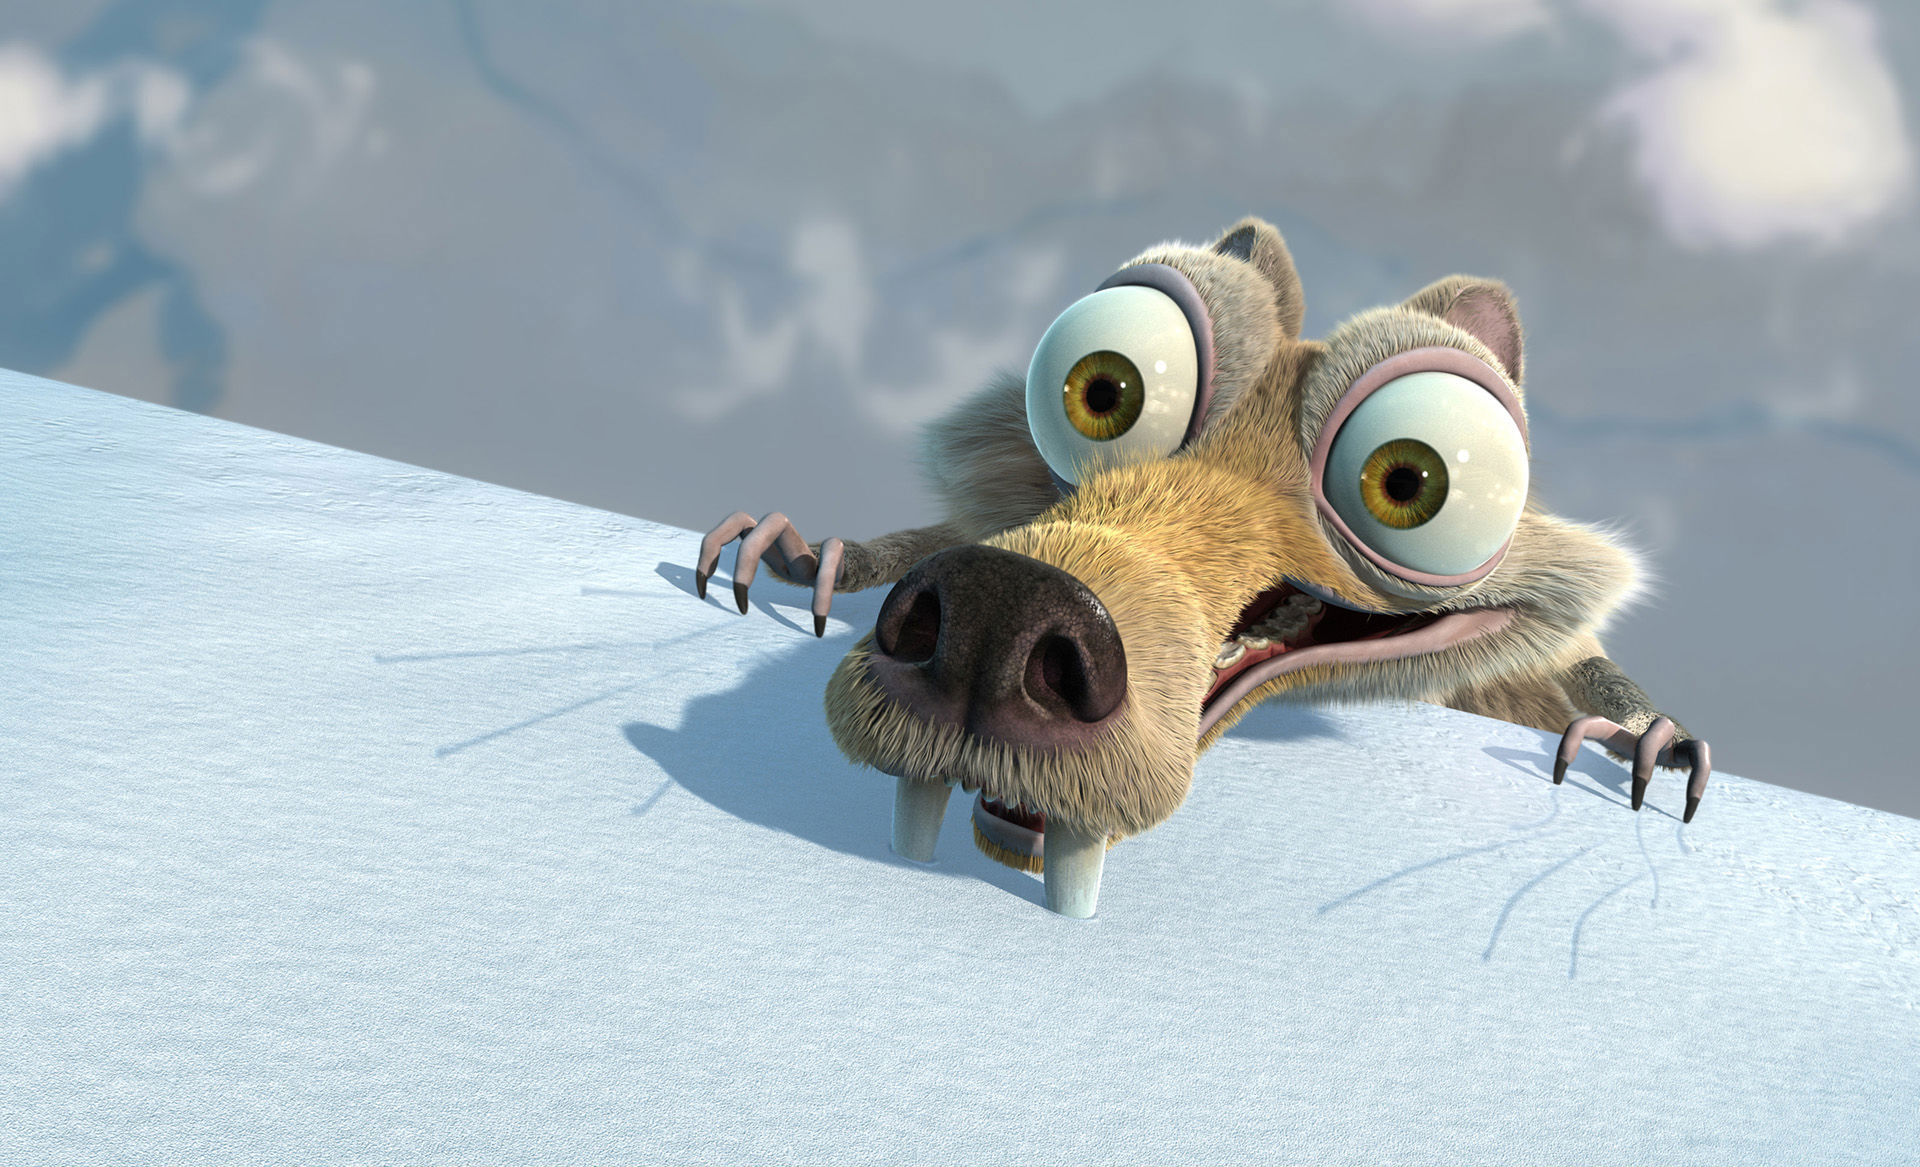 Movie Ice Age Dawn Of The Dinosaurs 1920x1167